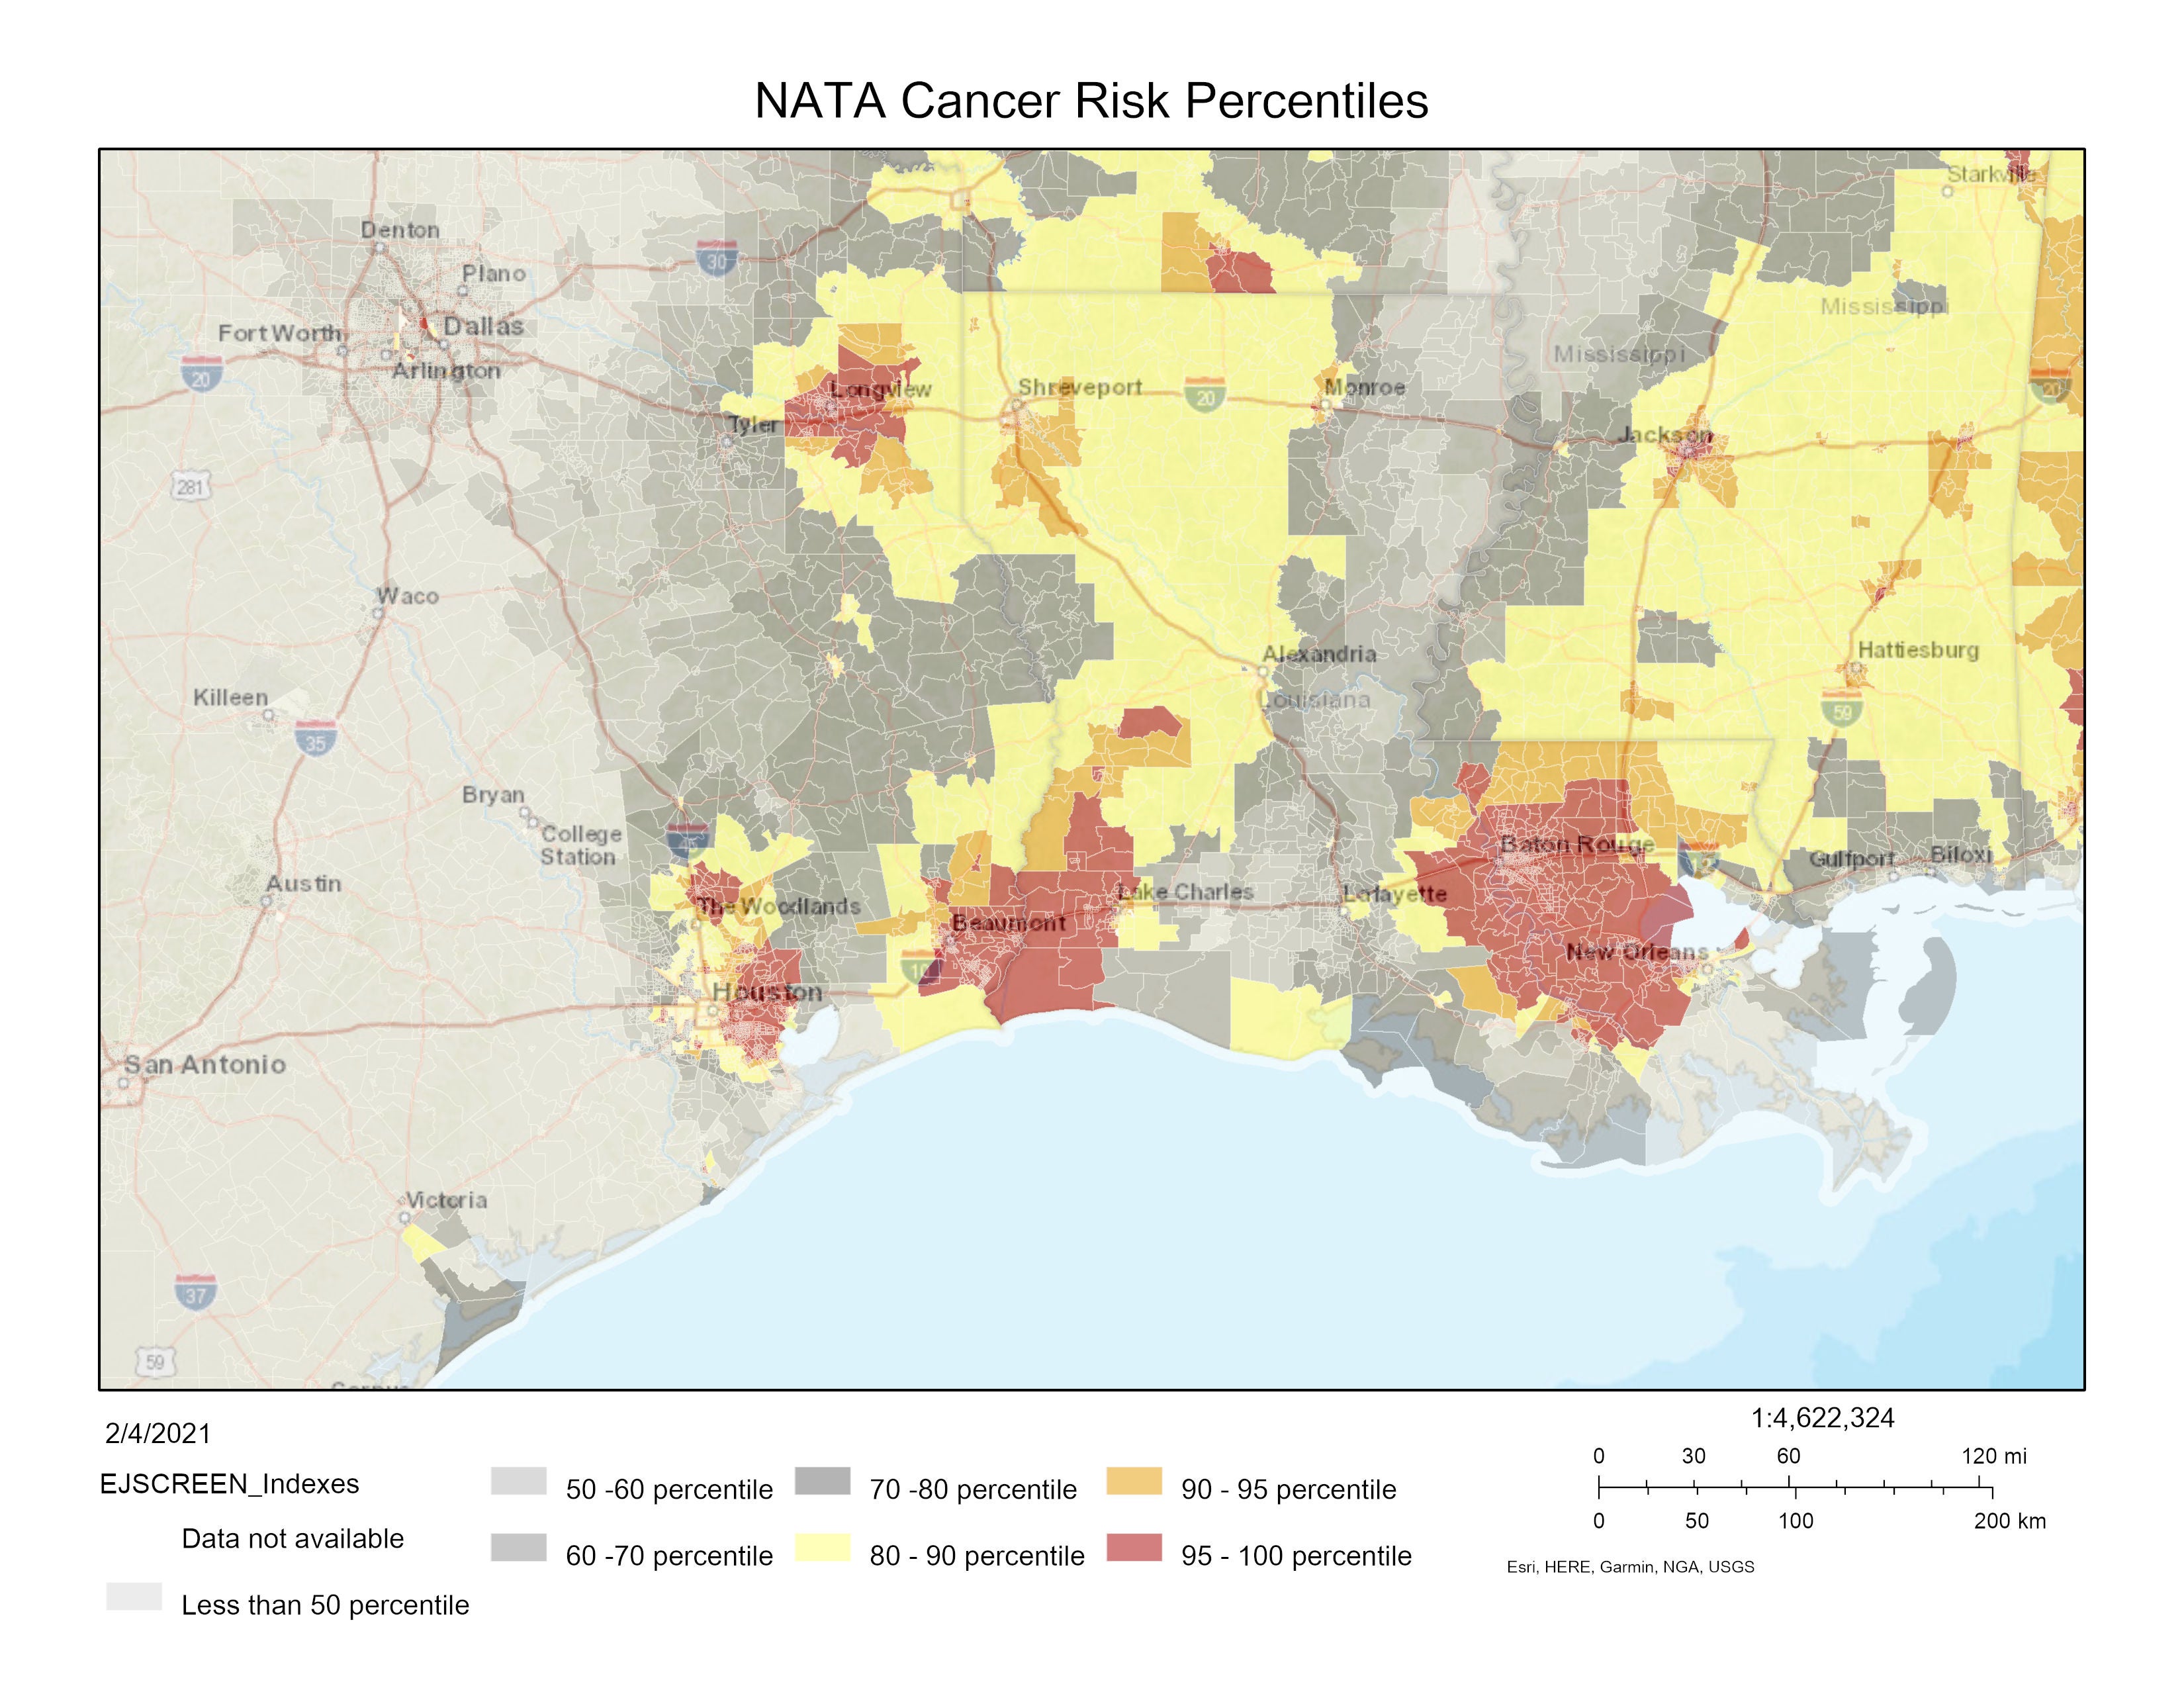 A map of air pollution-related cancer risk across Louisiana, based on EPA’s most recent (2014) National Air Toxics Assessment. Most of the area between Baton Rouge and New Orleans is in the 95-100 percentile nationally, meaning that the residents of these areas have a higher air-pollution-related cancer risk than at least 95 per cent of Americans